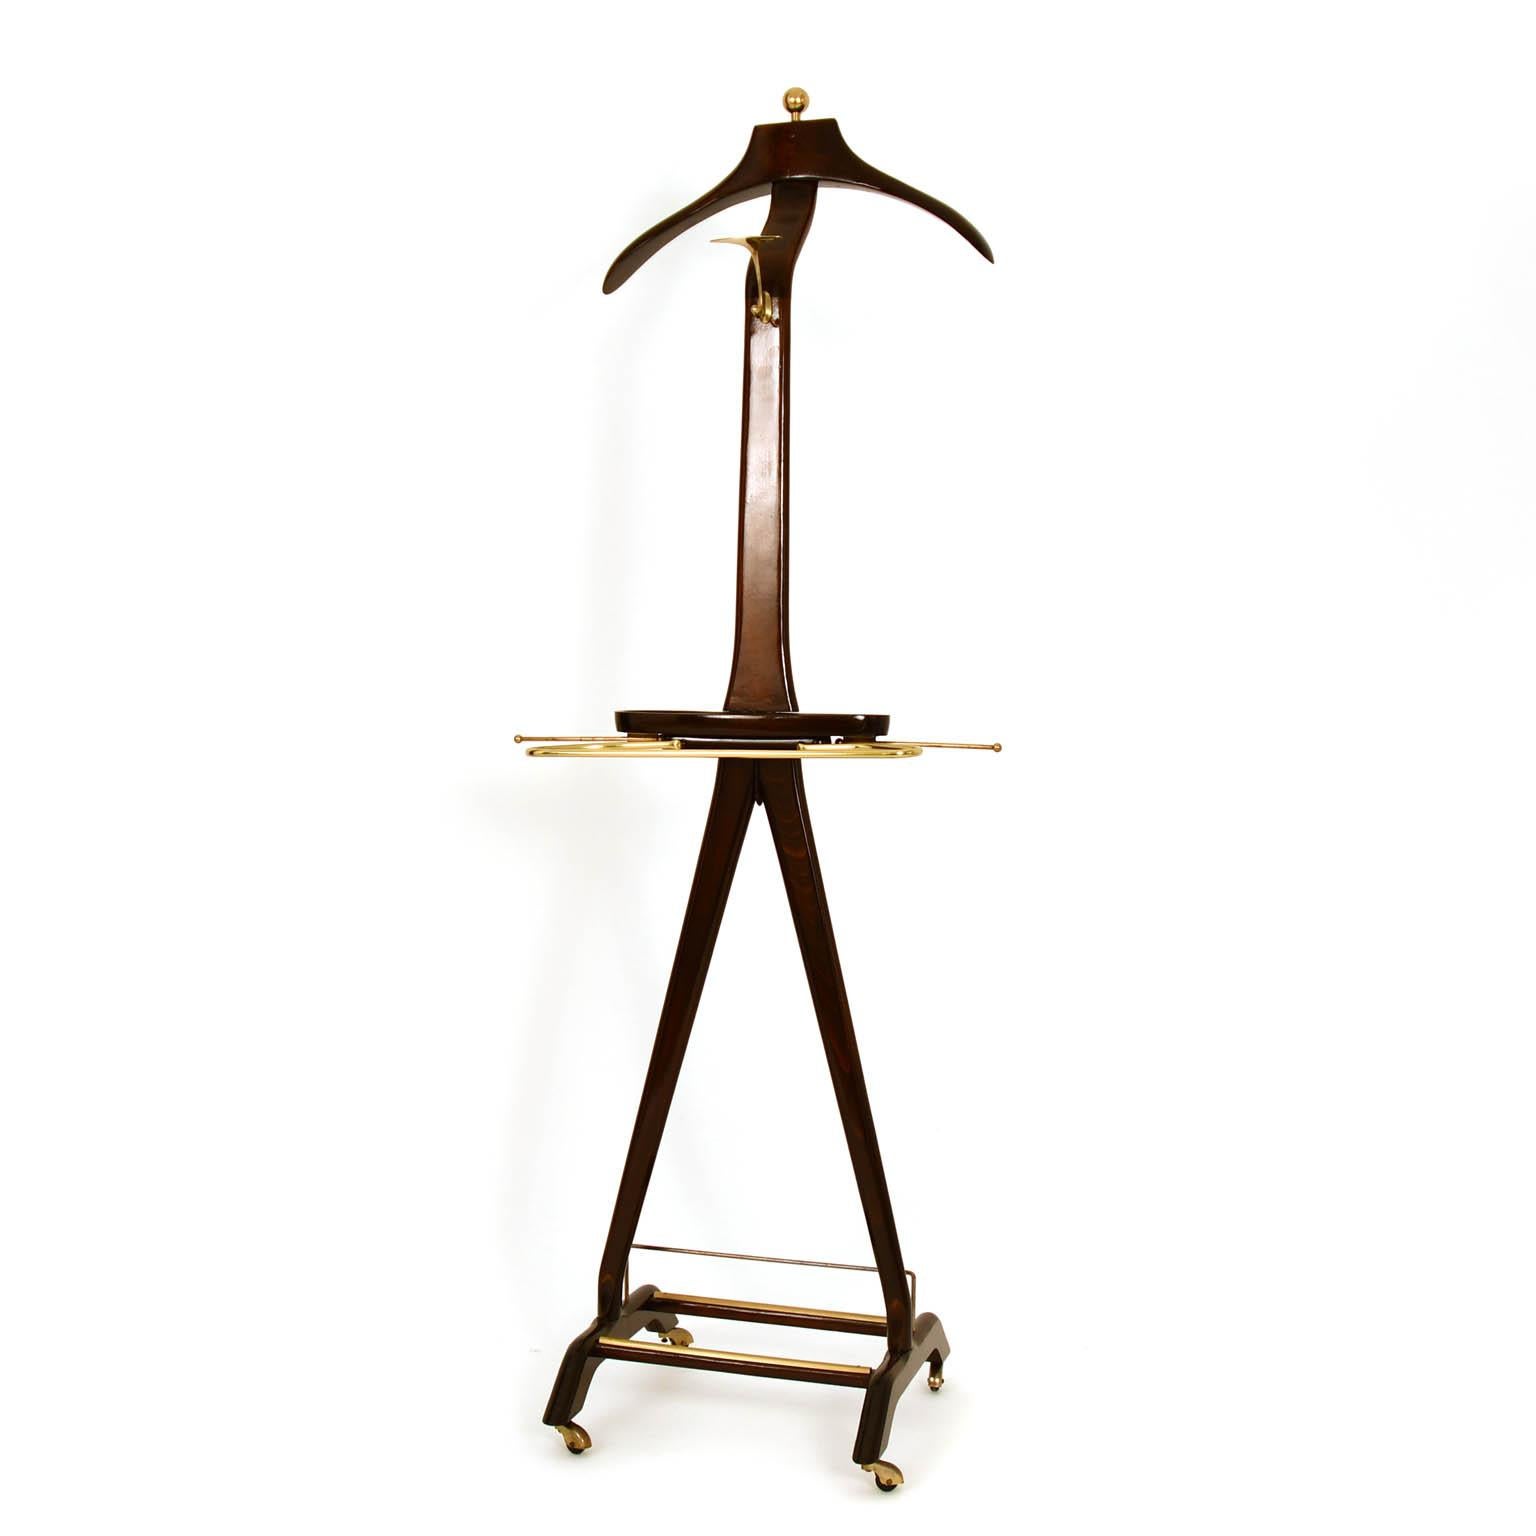 Ico and Luisa Parisi designed this valet in the late 1950s. Mahogany stained beech, beautiful brass elements rods and details. At the base the valet has 4 tiny smoothly running casters.
A very elegant Italian design made by Fratelli Reguitti. The